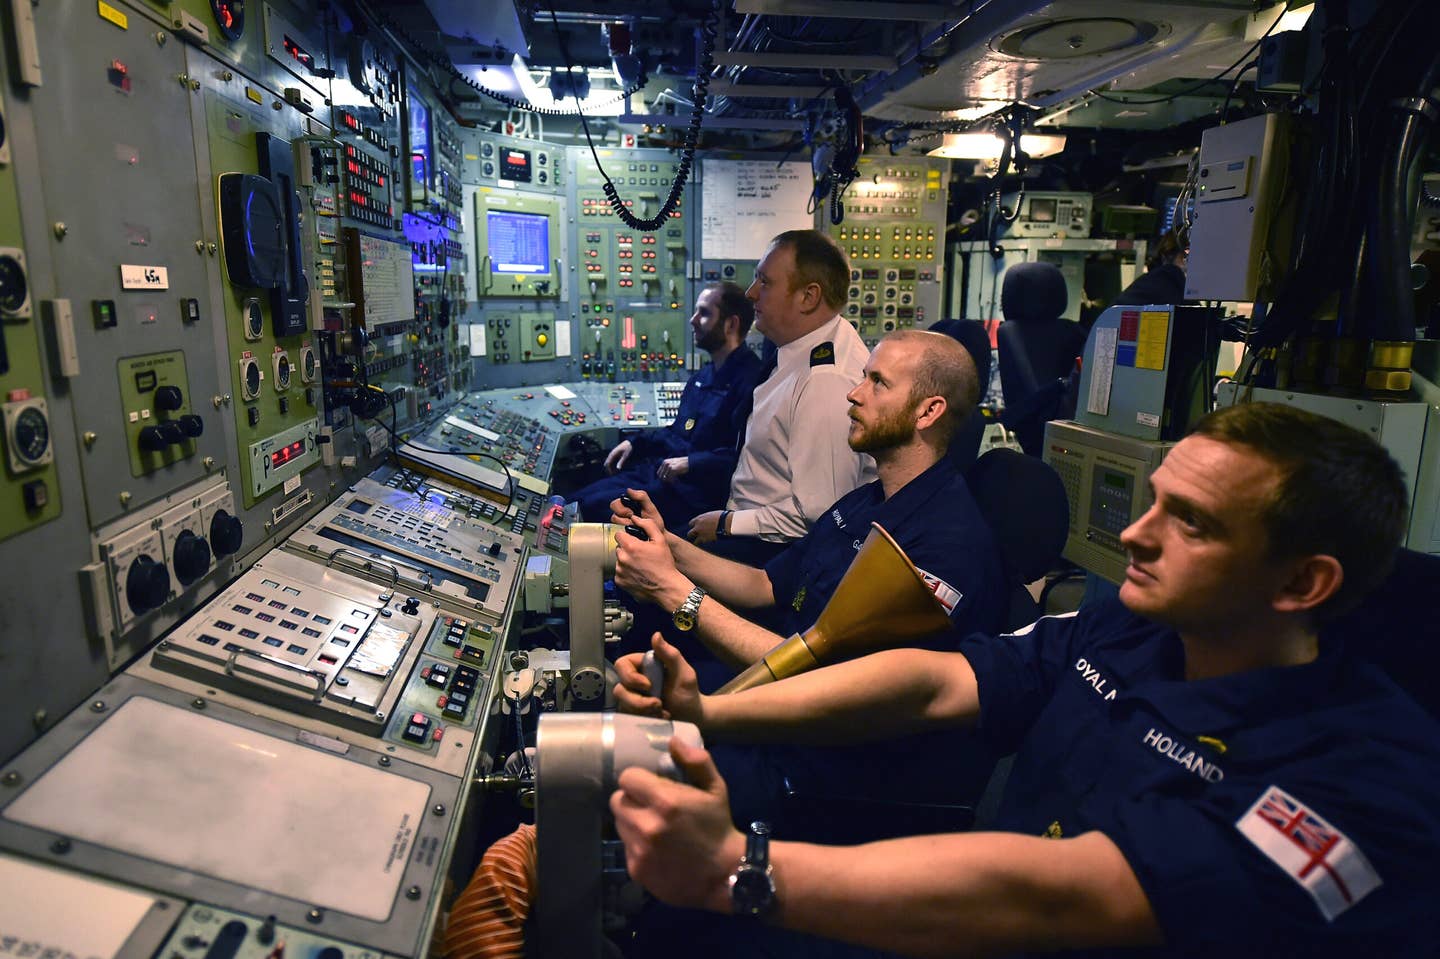 Royal Navy personnel in the control room on HMS <em>Vigilant</em>, one of the four <em>Vanguard</em> class submarines, in 2016. <em>Photo by Jeff J Mitchell/Getty Images</em>